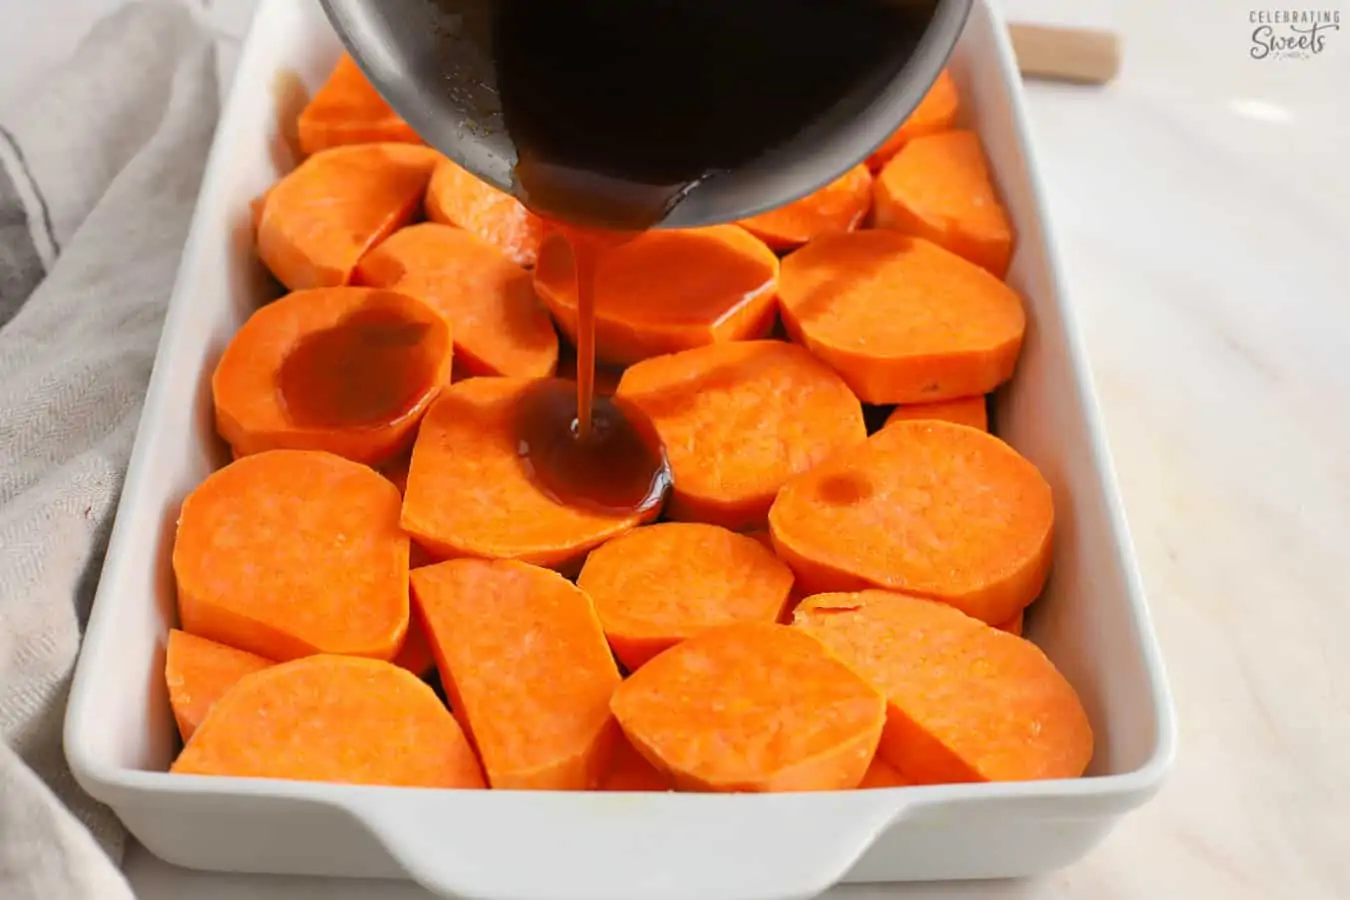 Brown sauce being poured over chopped sweet potatoes in a white baking dish.